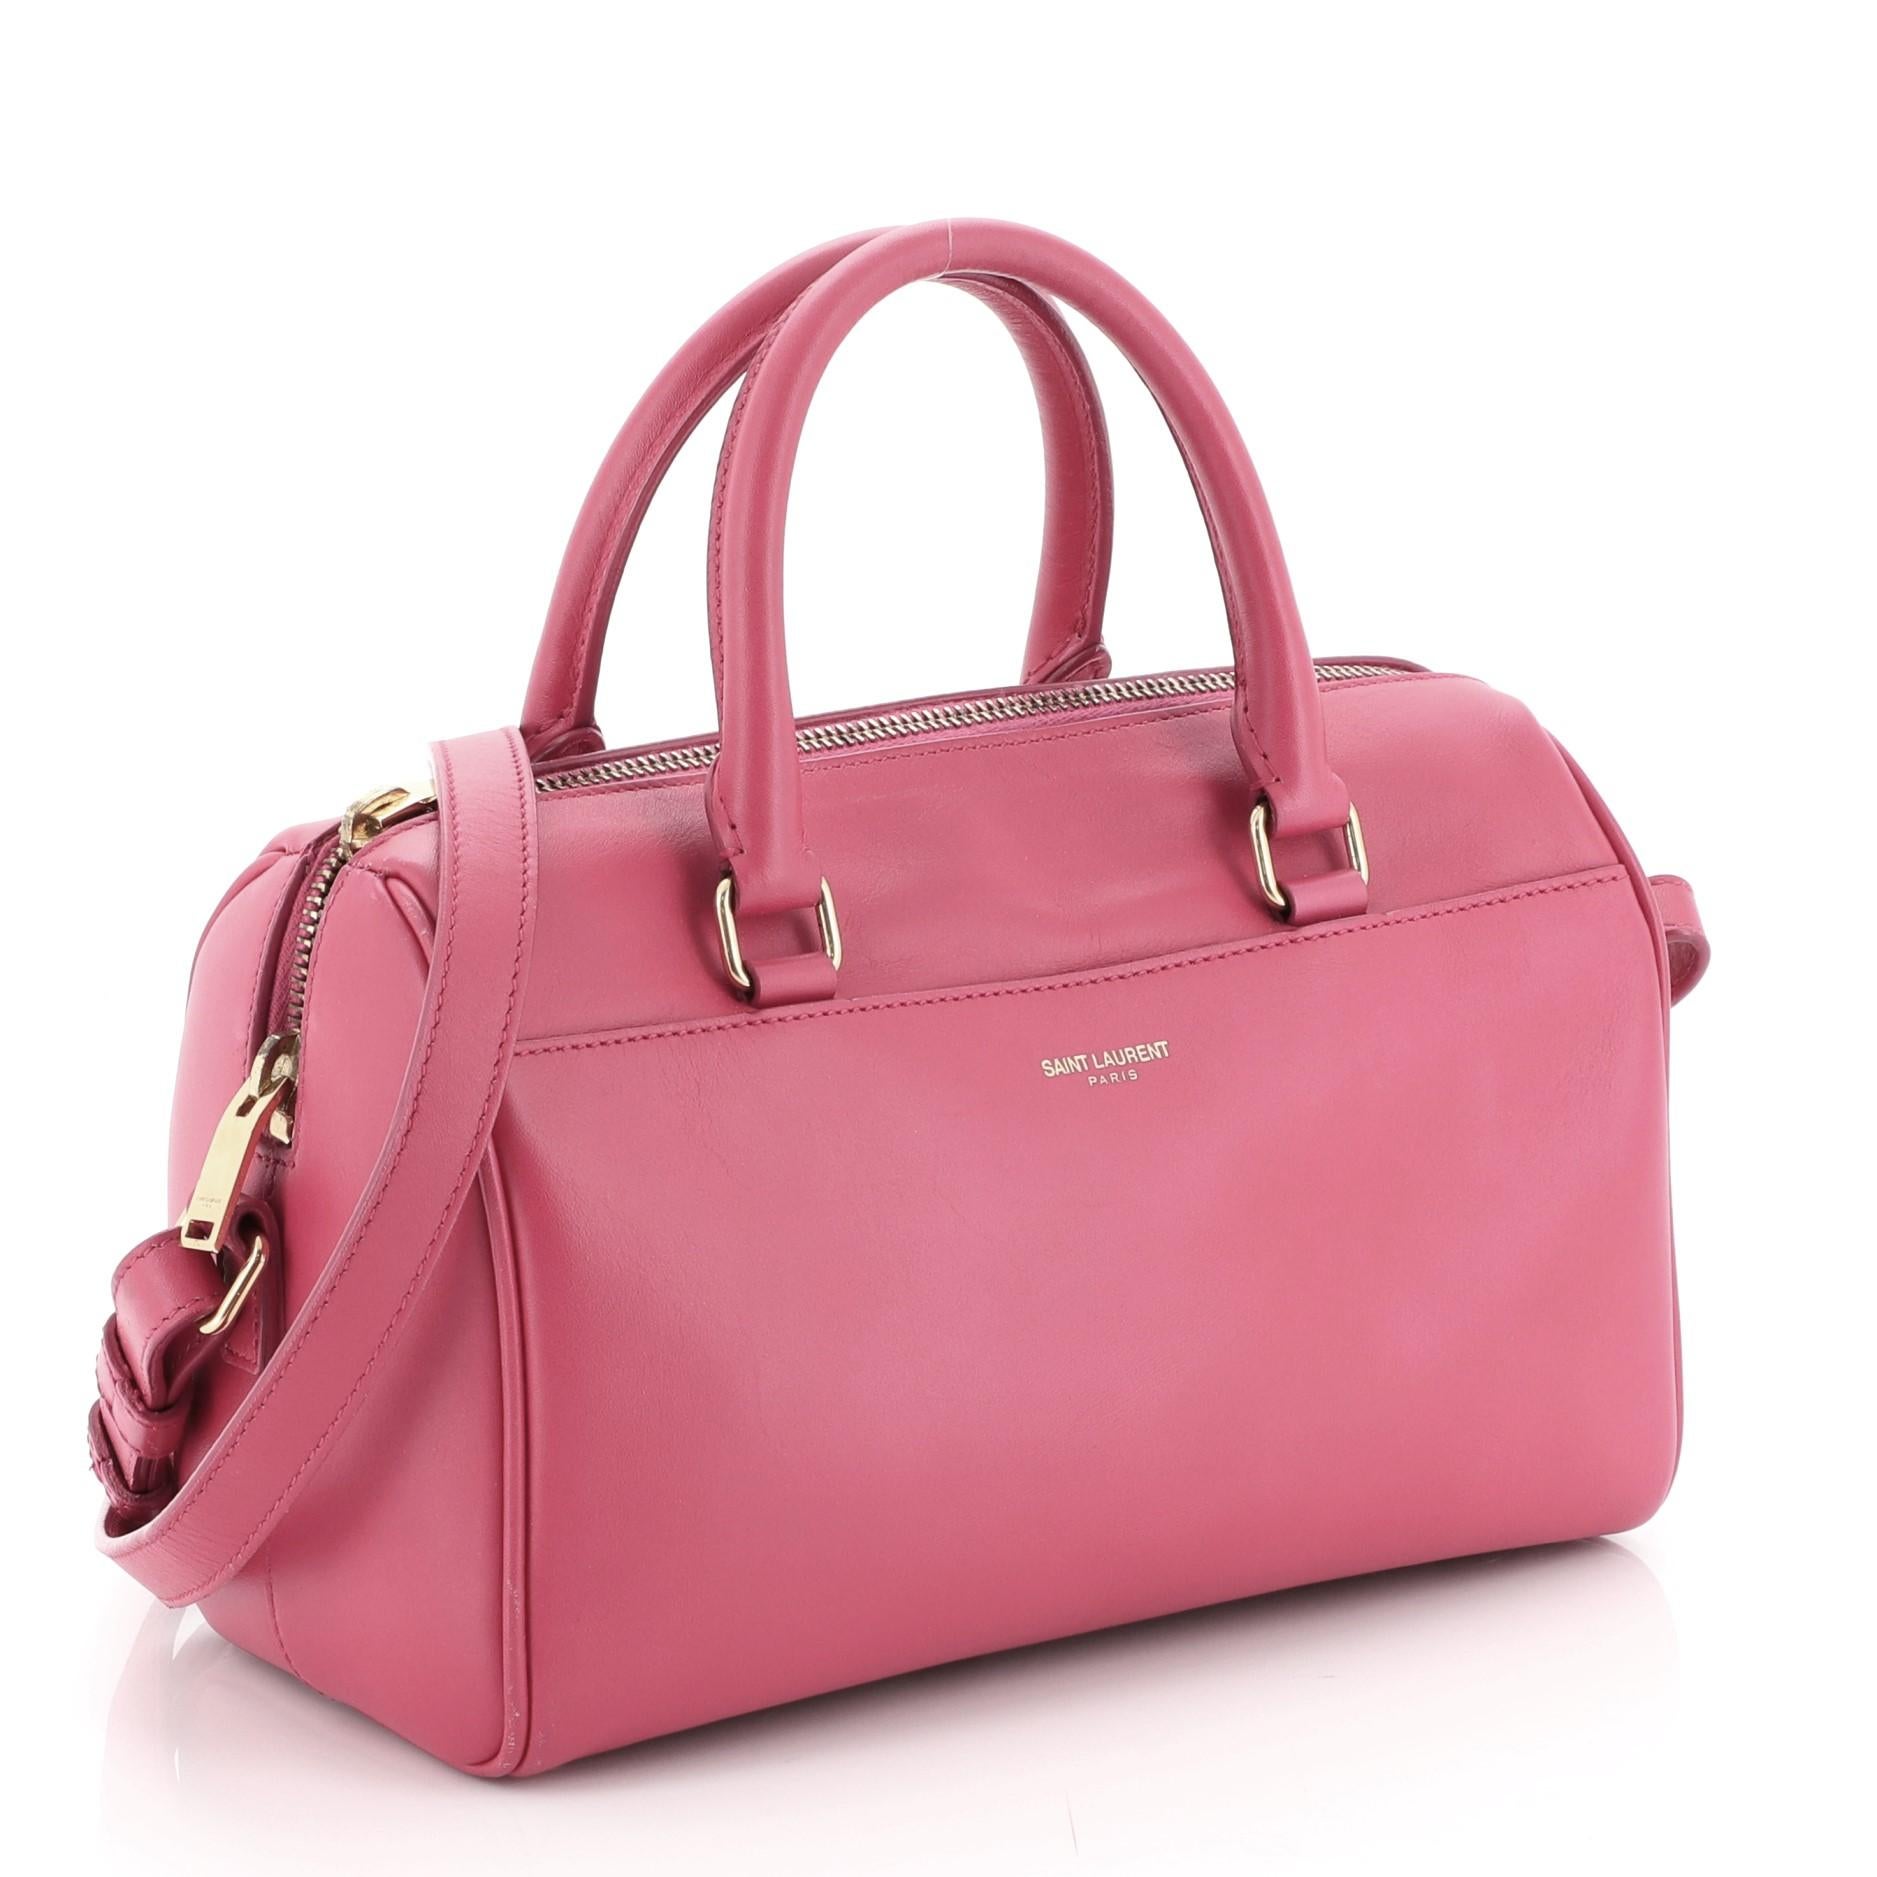 This Saint Laurent Classic Baby Duffle Bag Leather, crafted from pink leather, features dual rolled handles, protective base studs, and gold-tone hardware. Its two-way zip closure opens to a pink suede interior with side slip pocket. 

Estimated